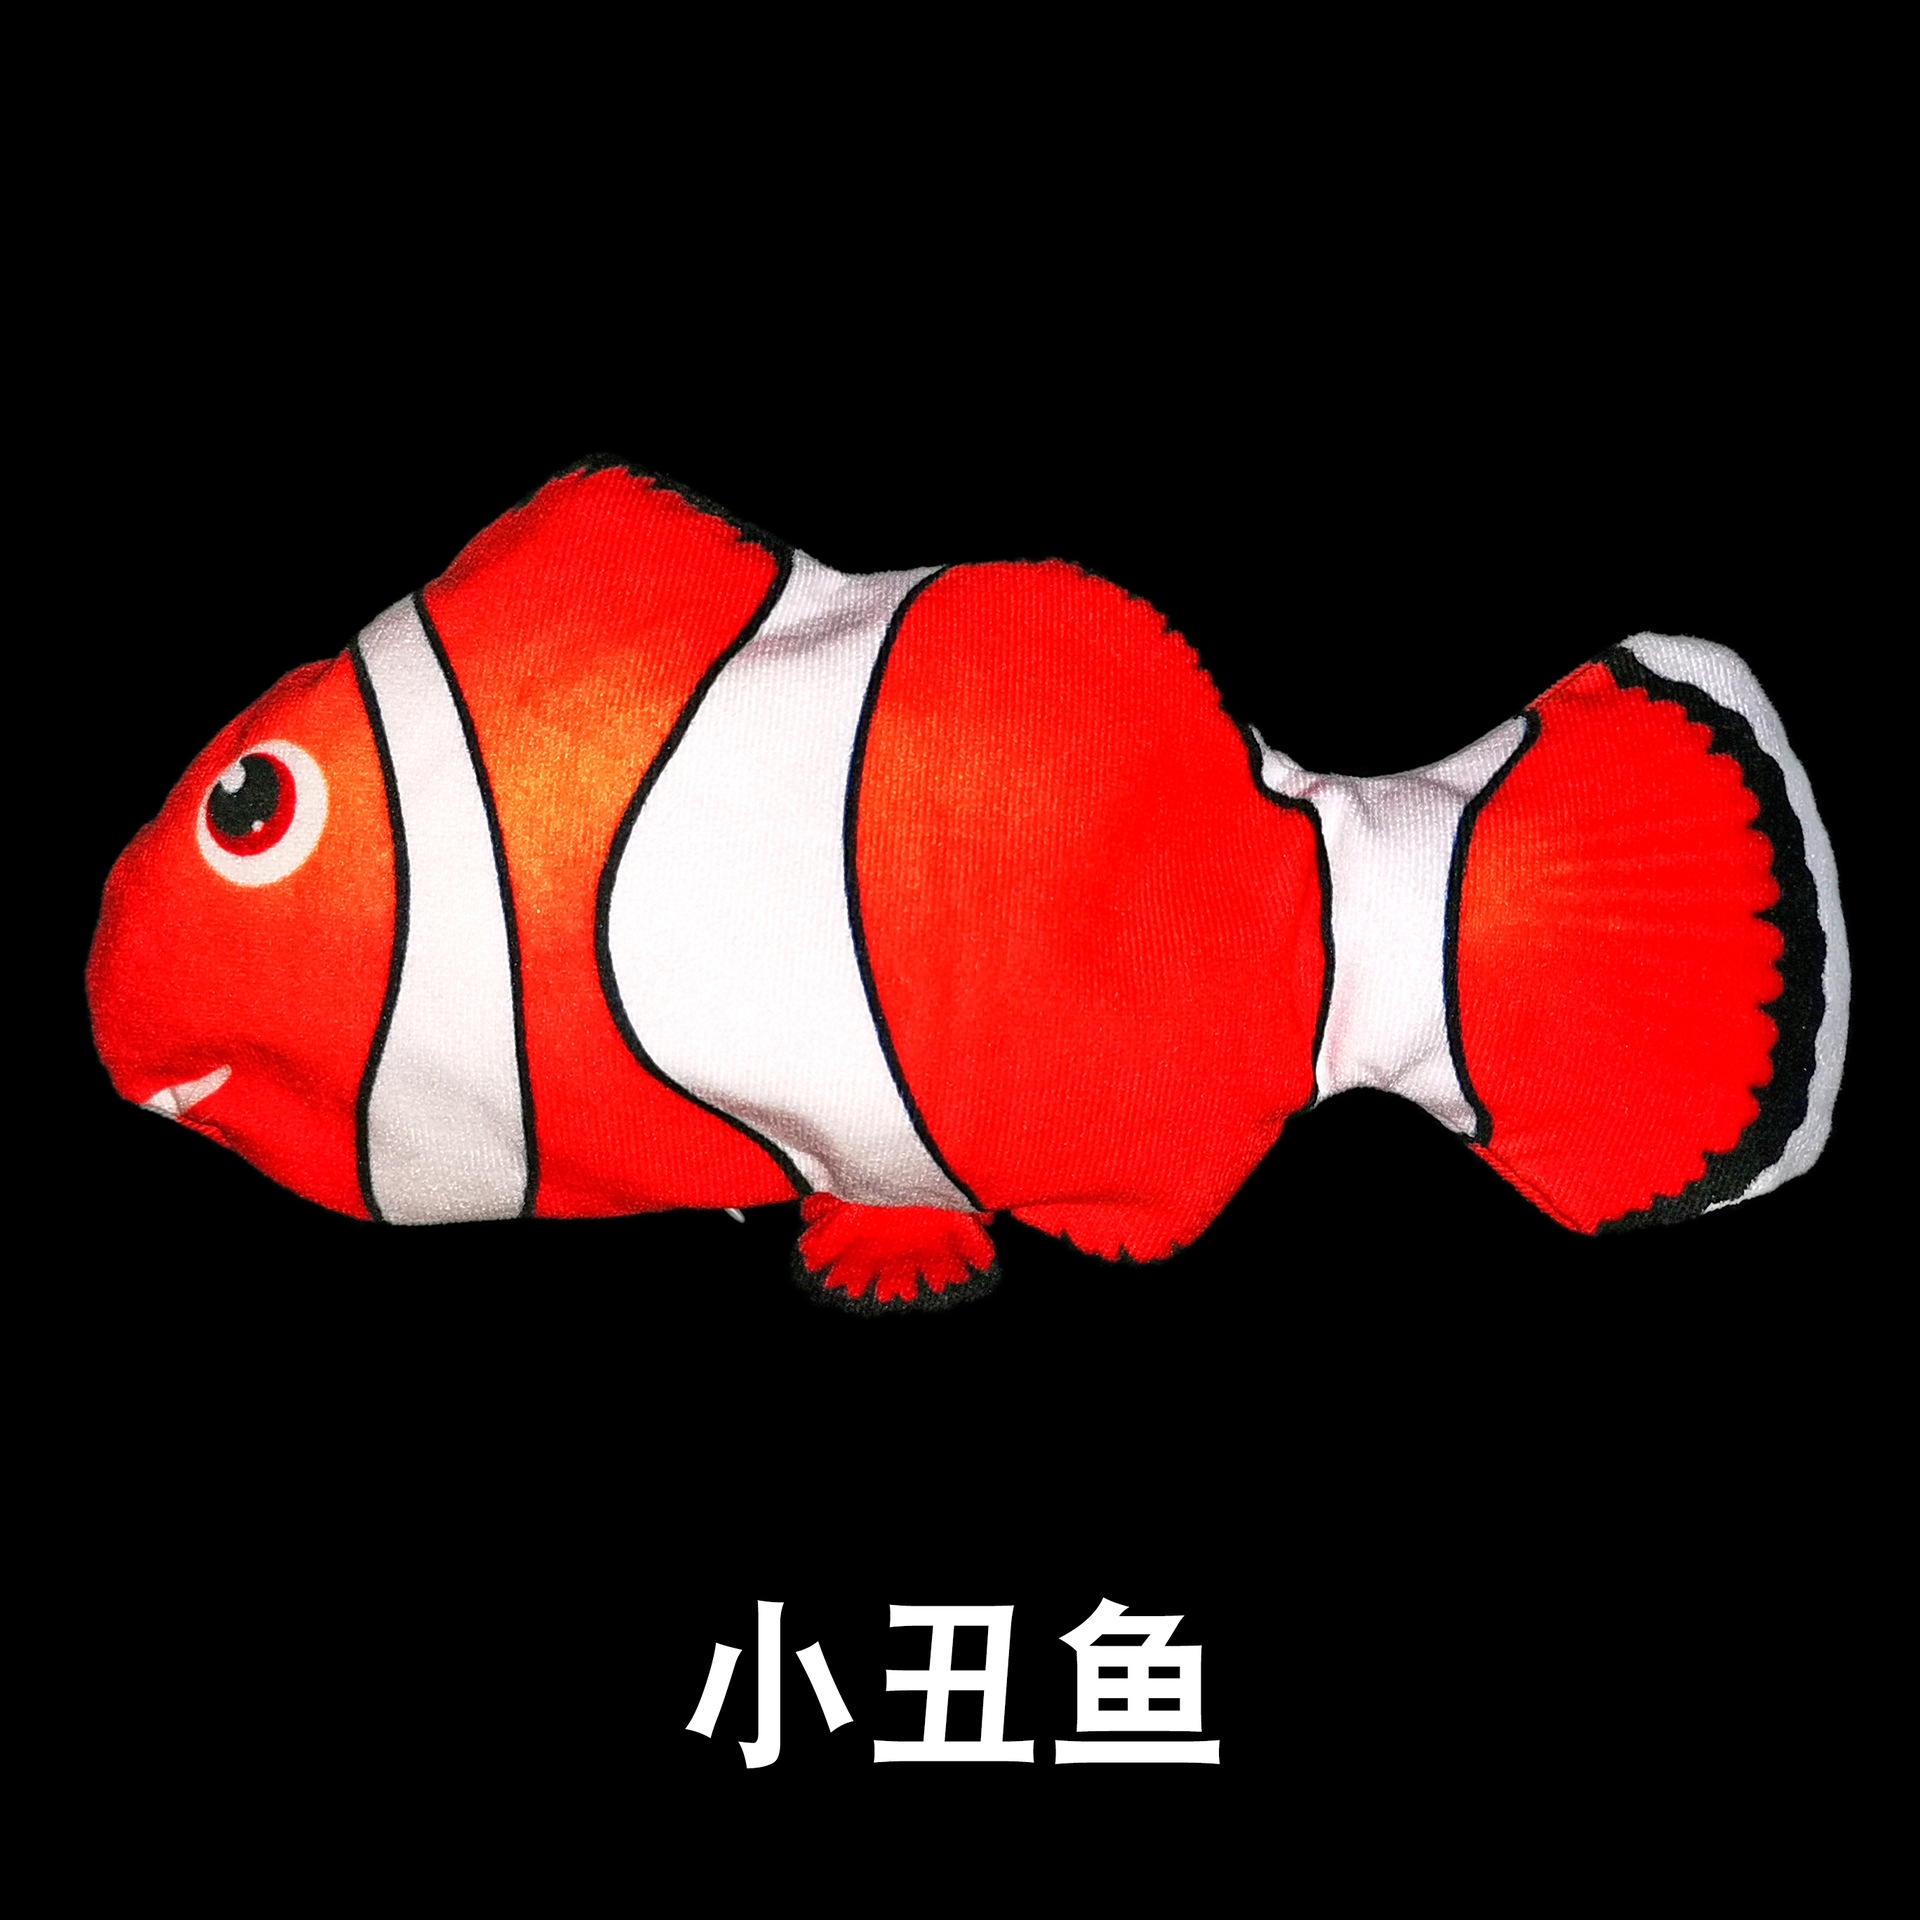 New Online Red Fish Stuffed Electric Toy TikTok Same Style Jumping Fish Simulation Toy Electric Swing Fish